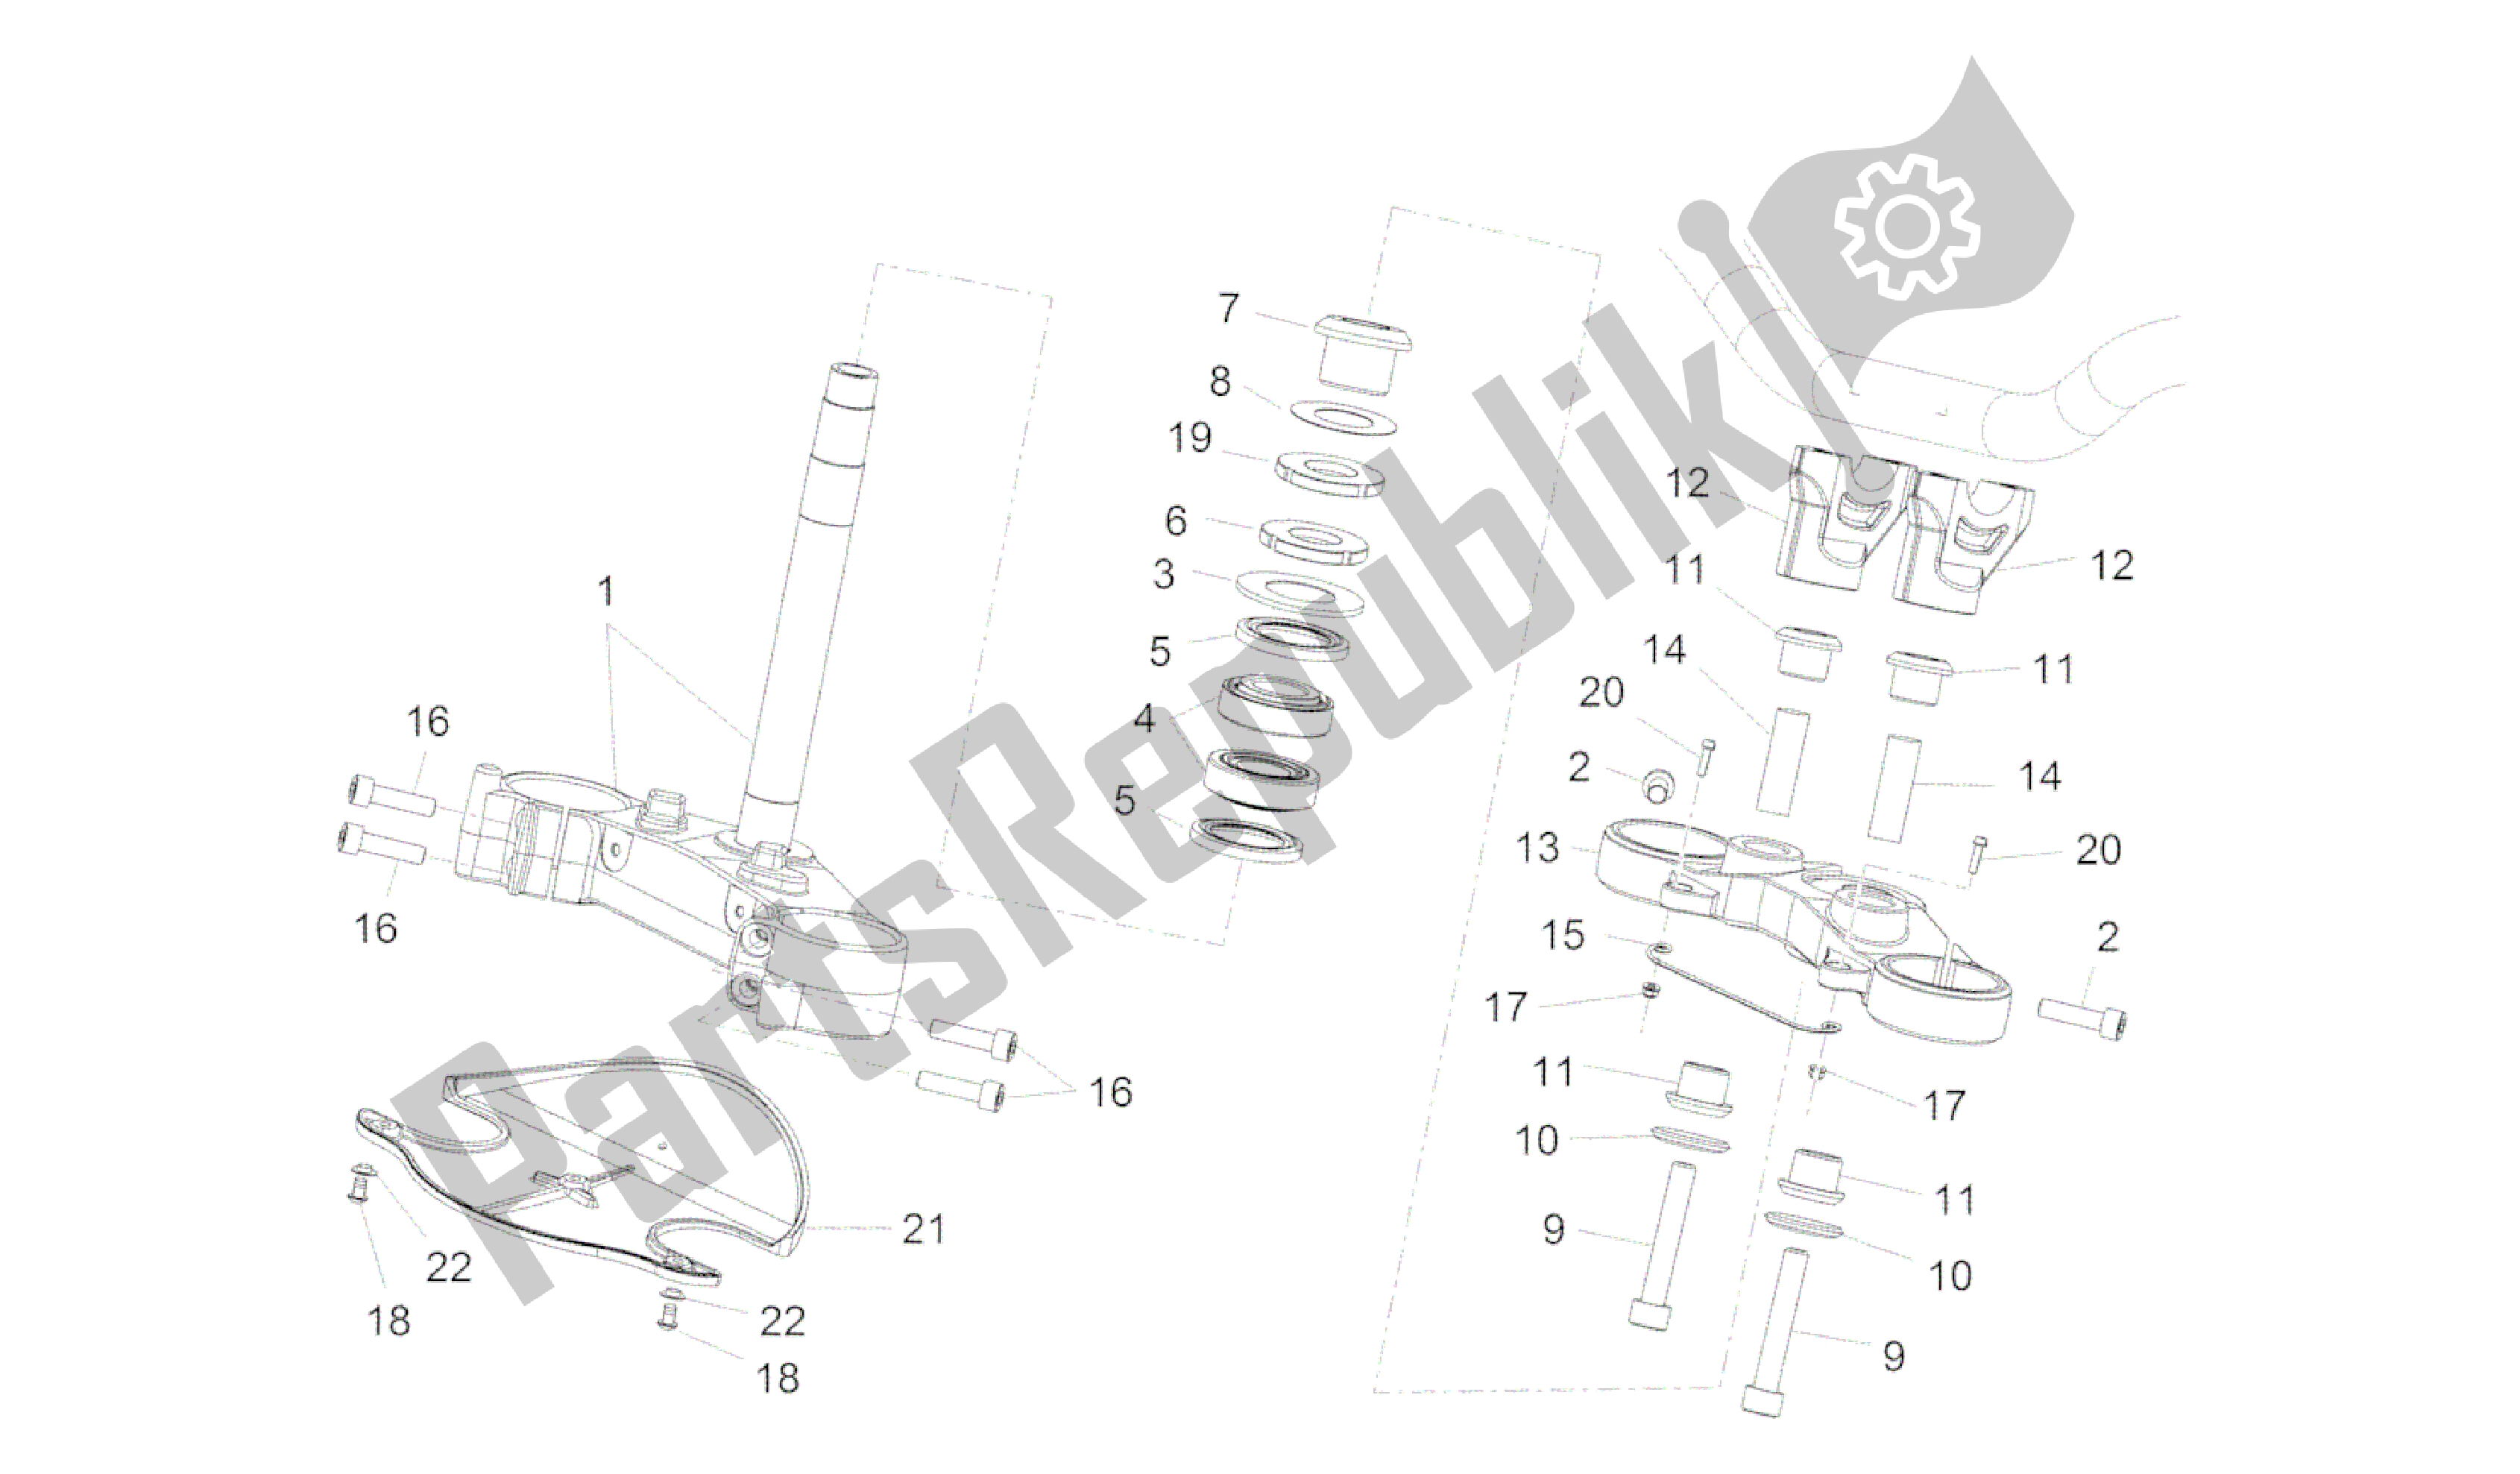 All parts for the Steering of the Aprilia Caponord 1200 2013 - 2015